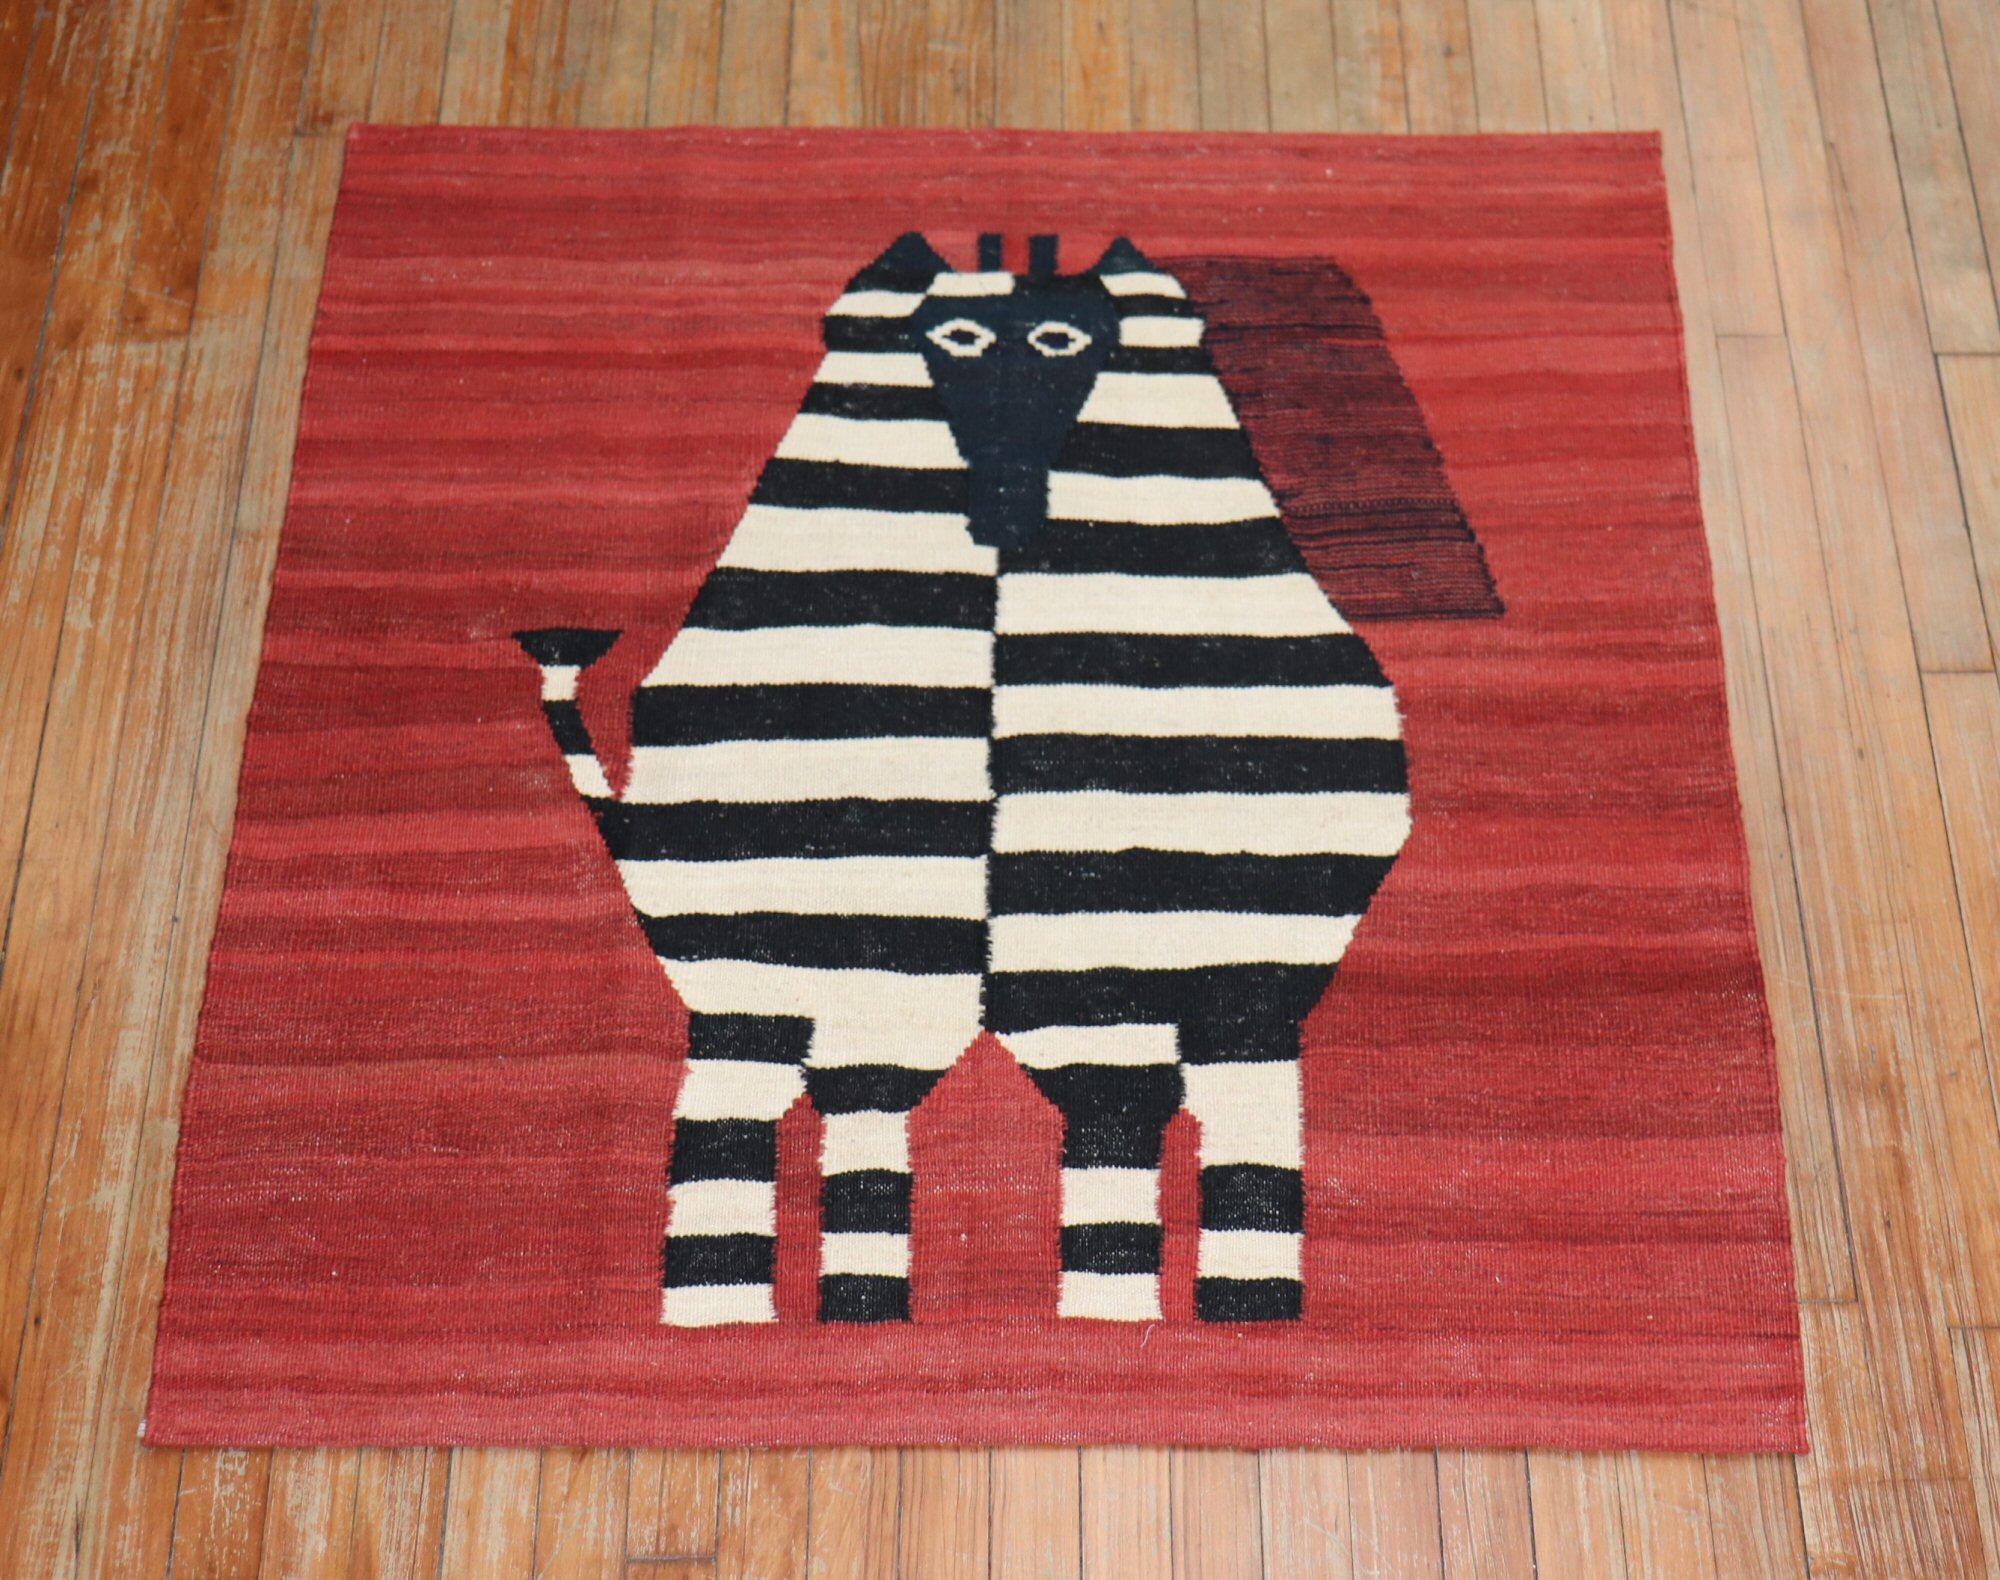 Scatter size Persian Kilim from the 20th century with a stand-alone Porcupine on a burnt red ground
Measures: 3'7